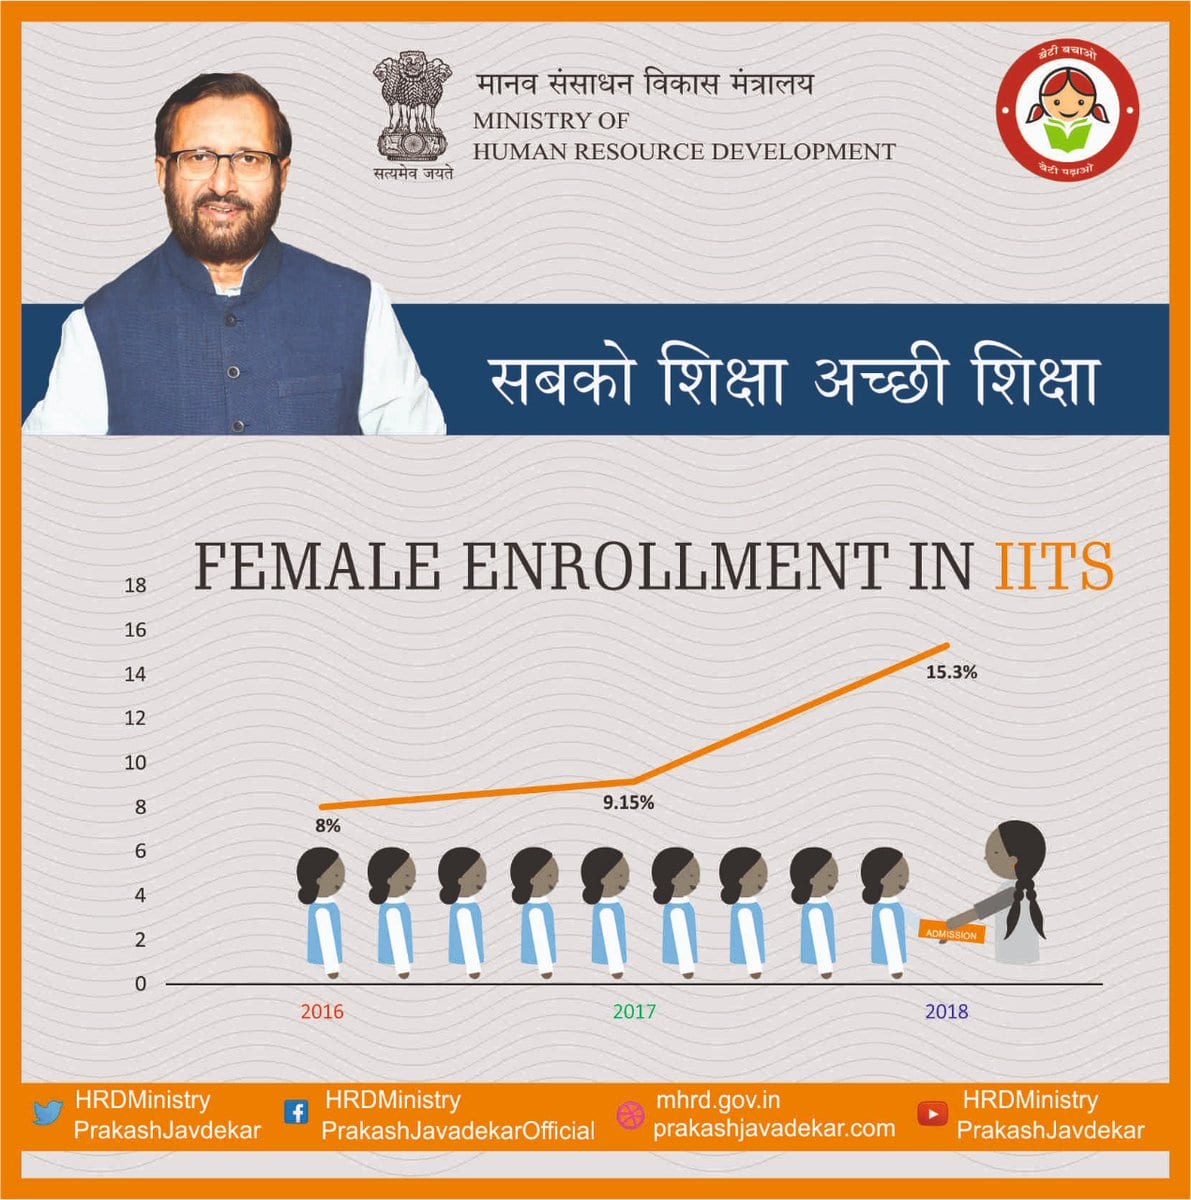 Government targets to increase number of female seats from 8% to 20% by 2020 in IITs